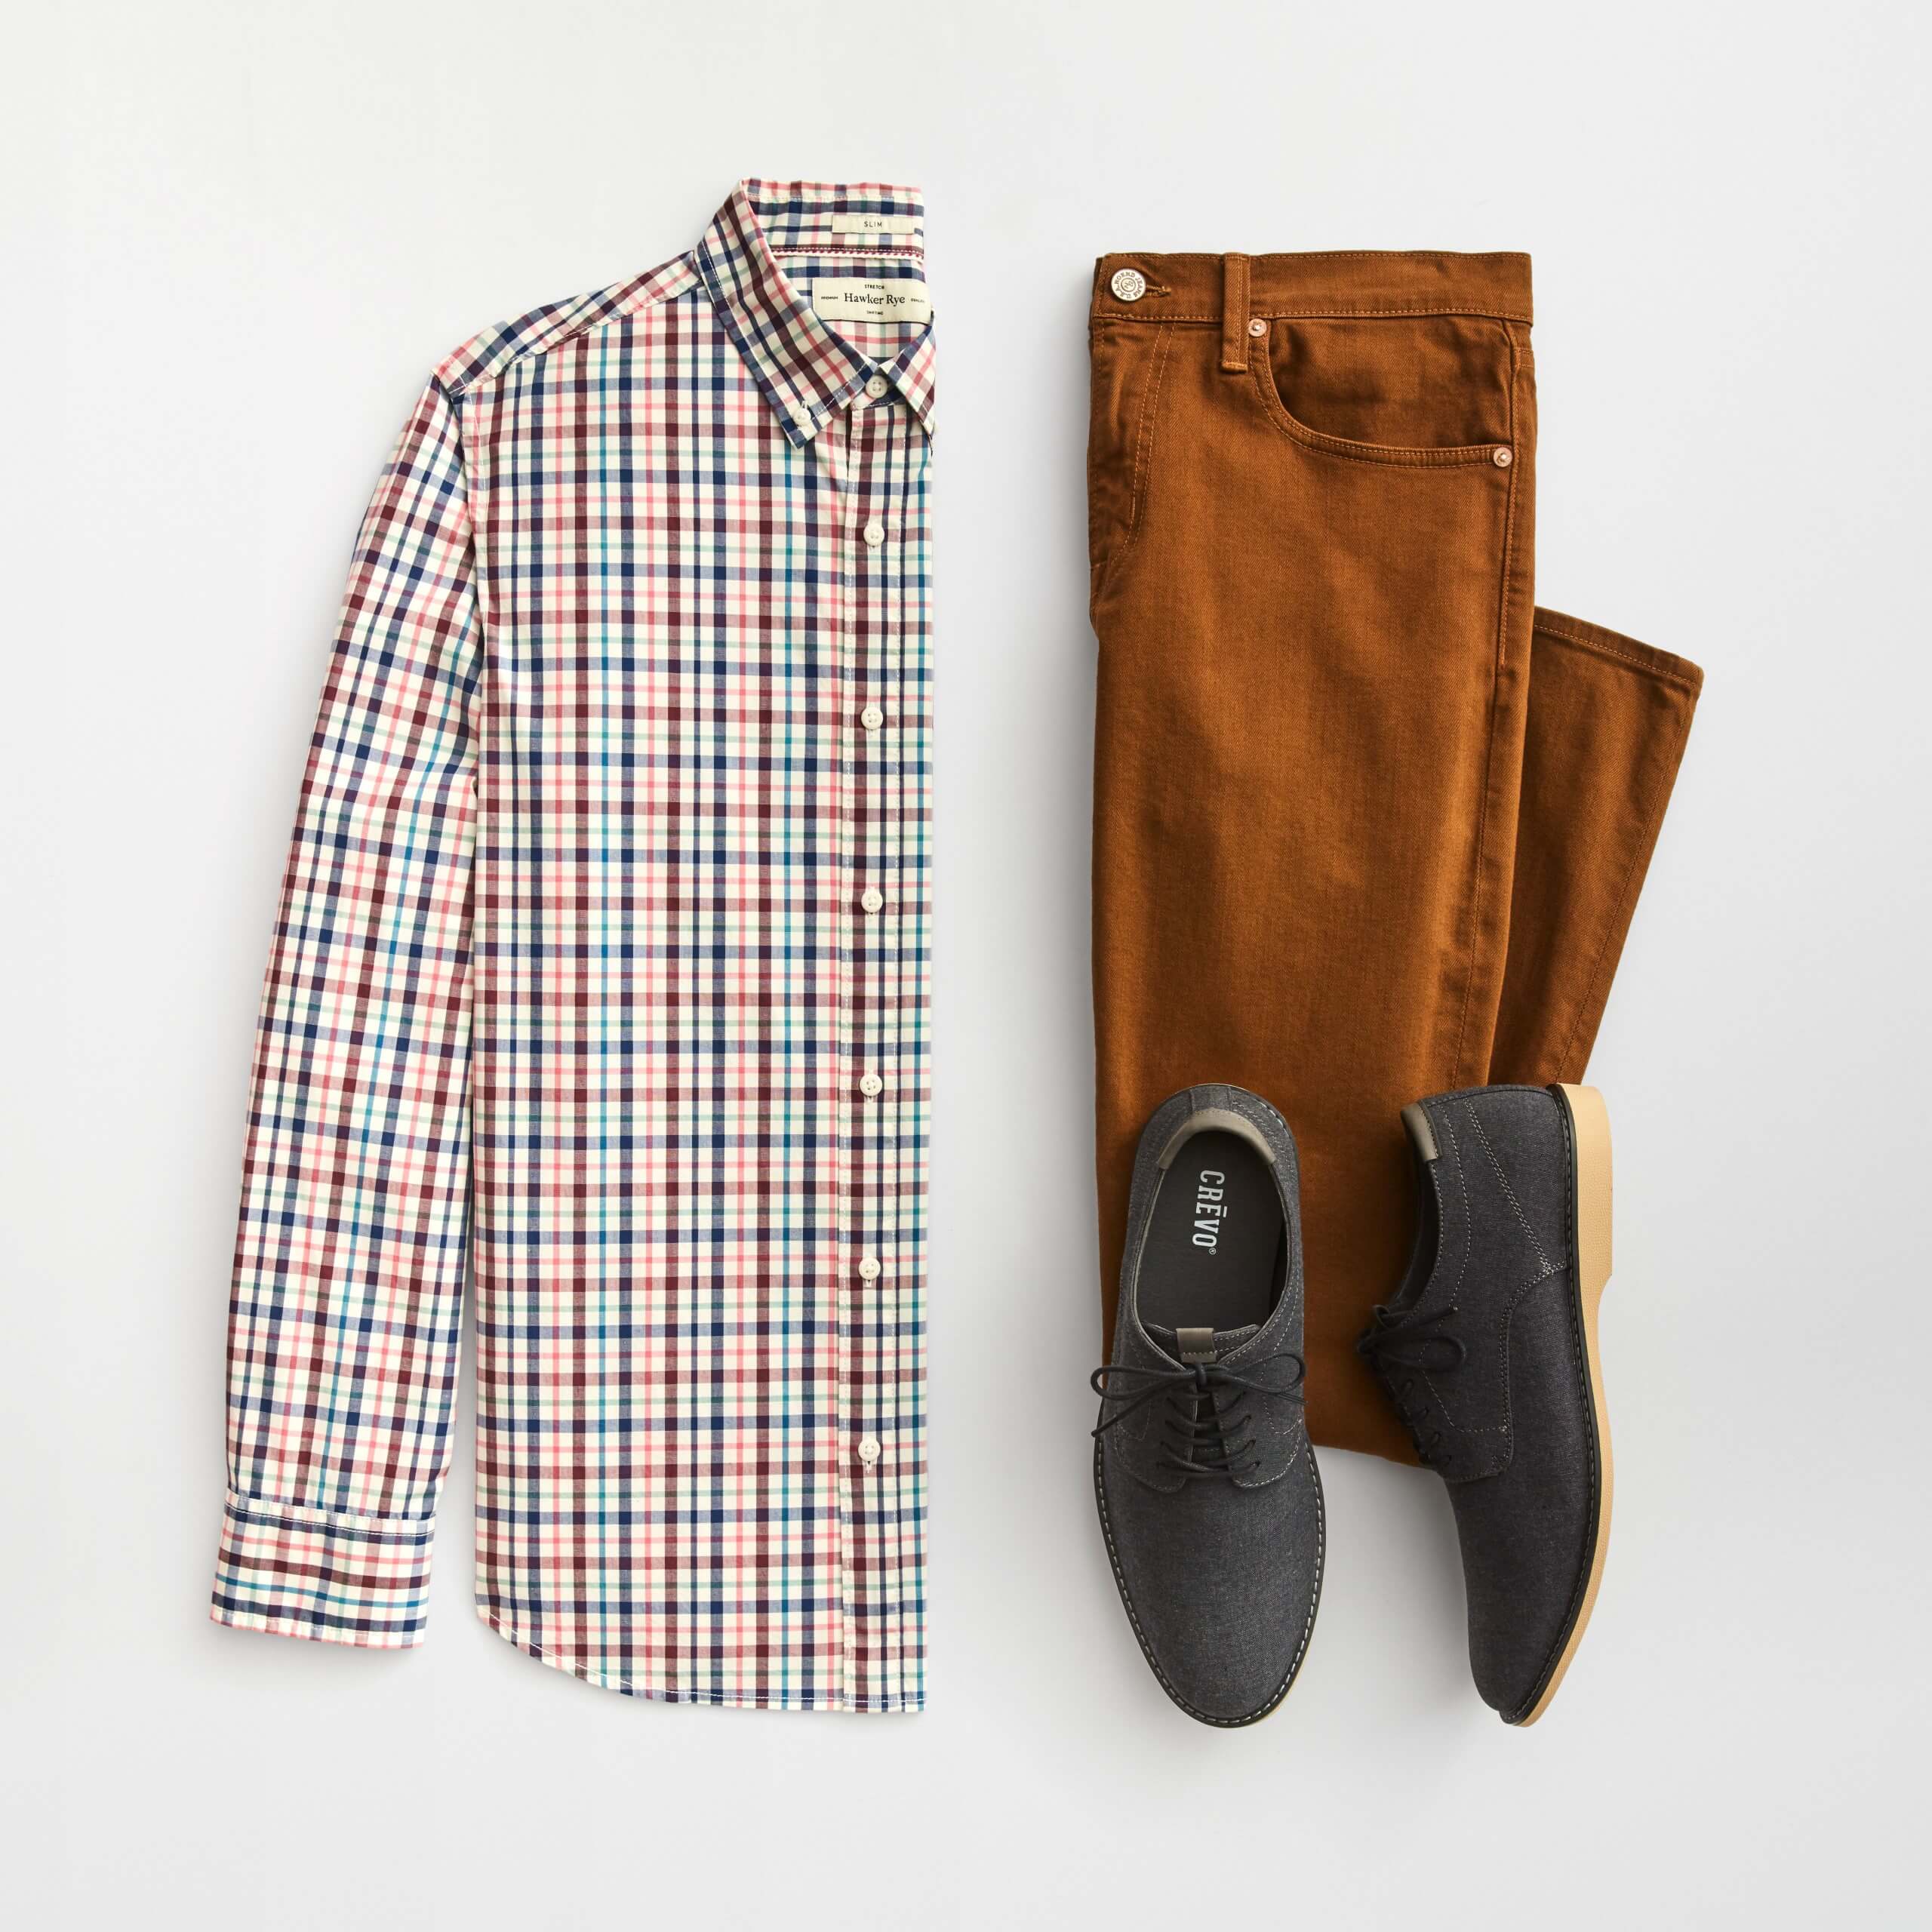 What to wear on a first date men casual